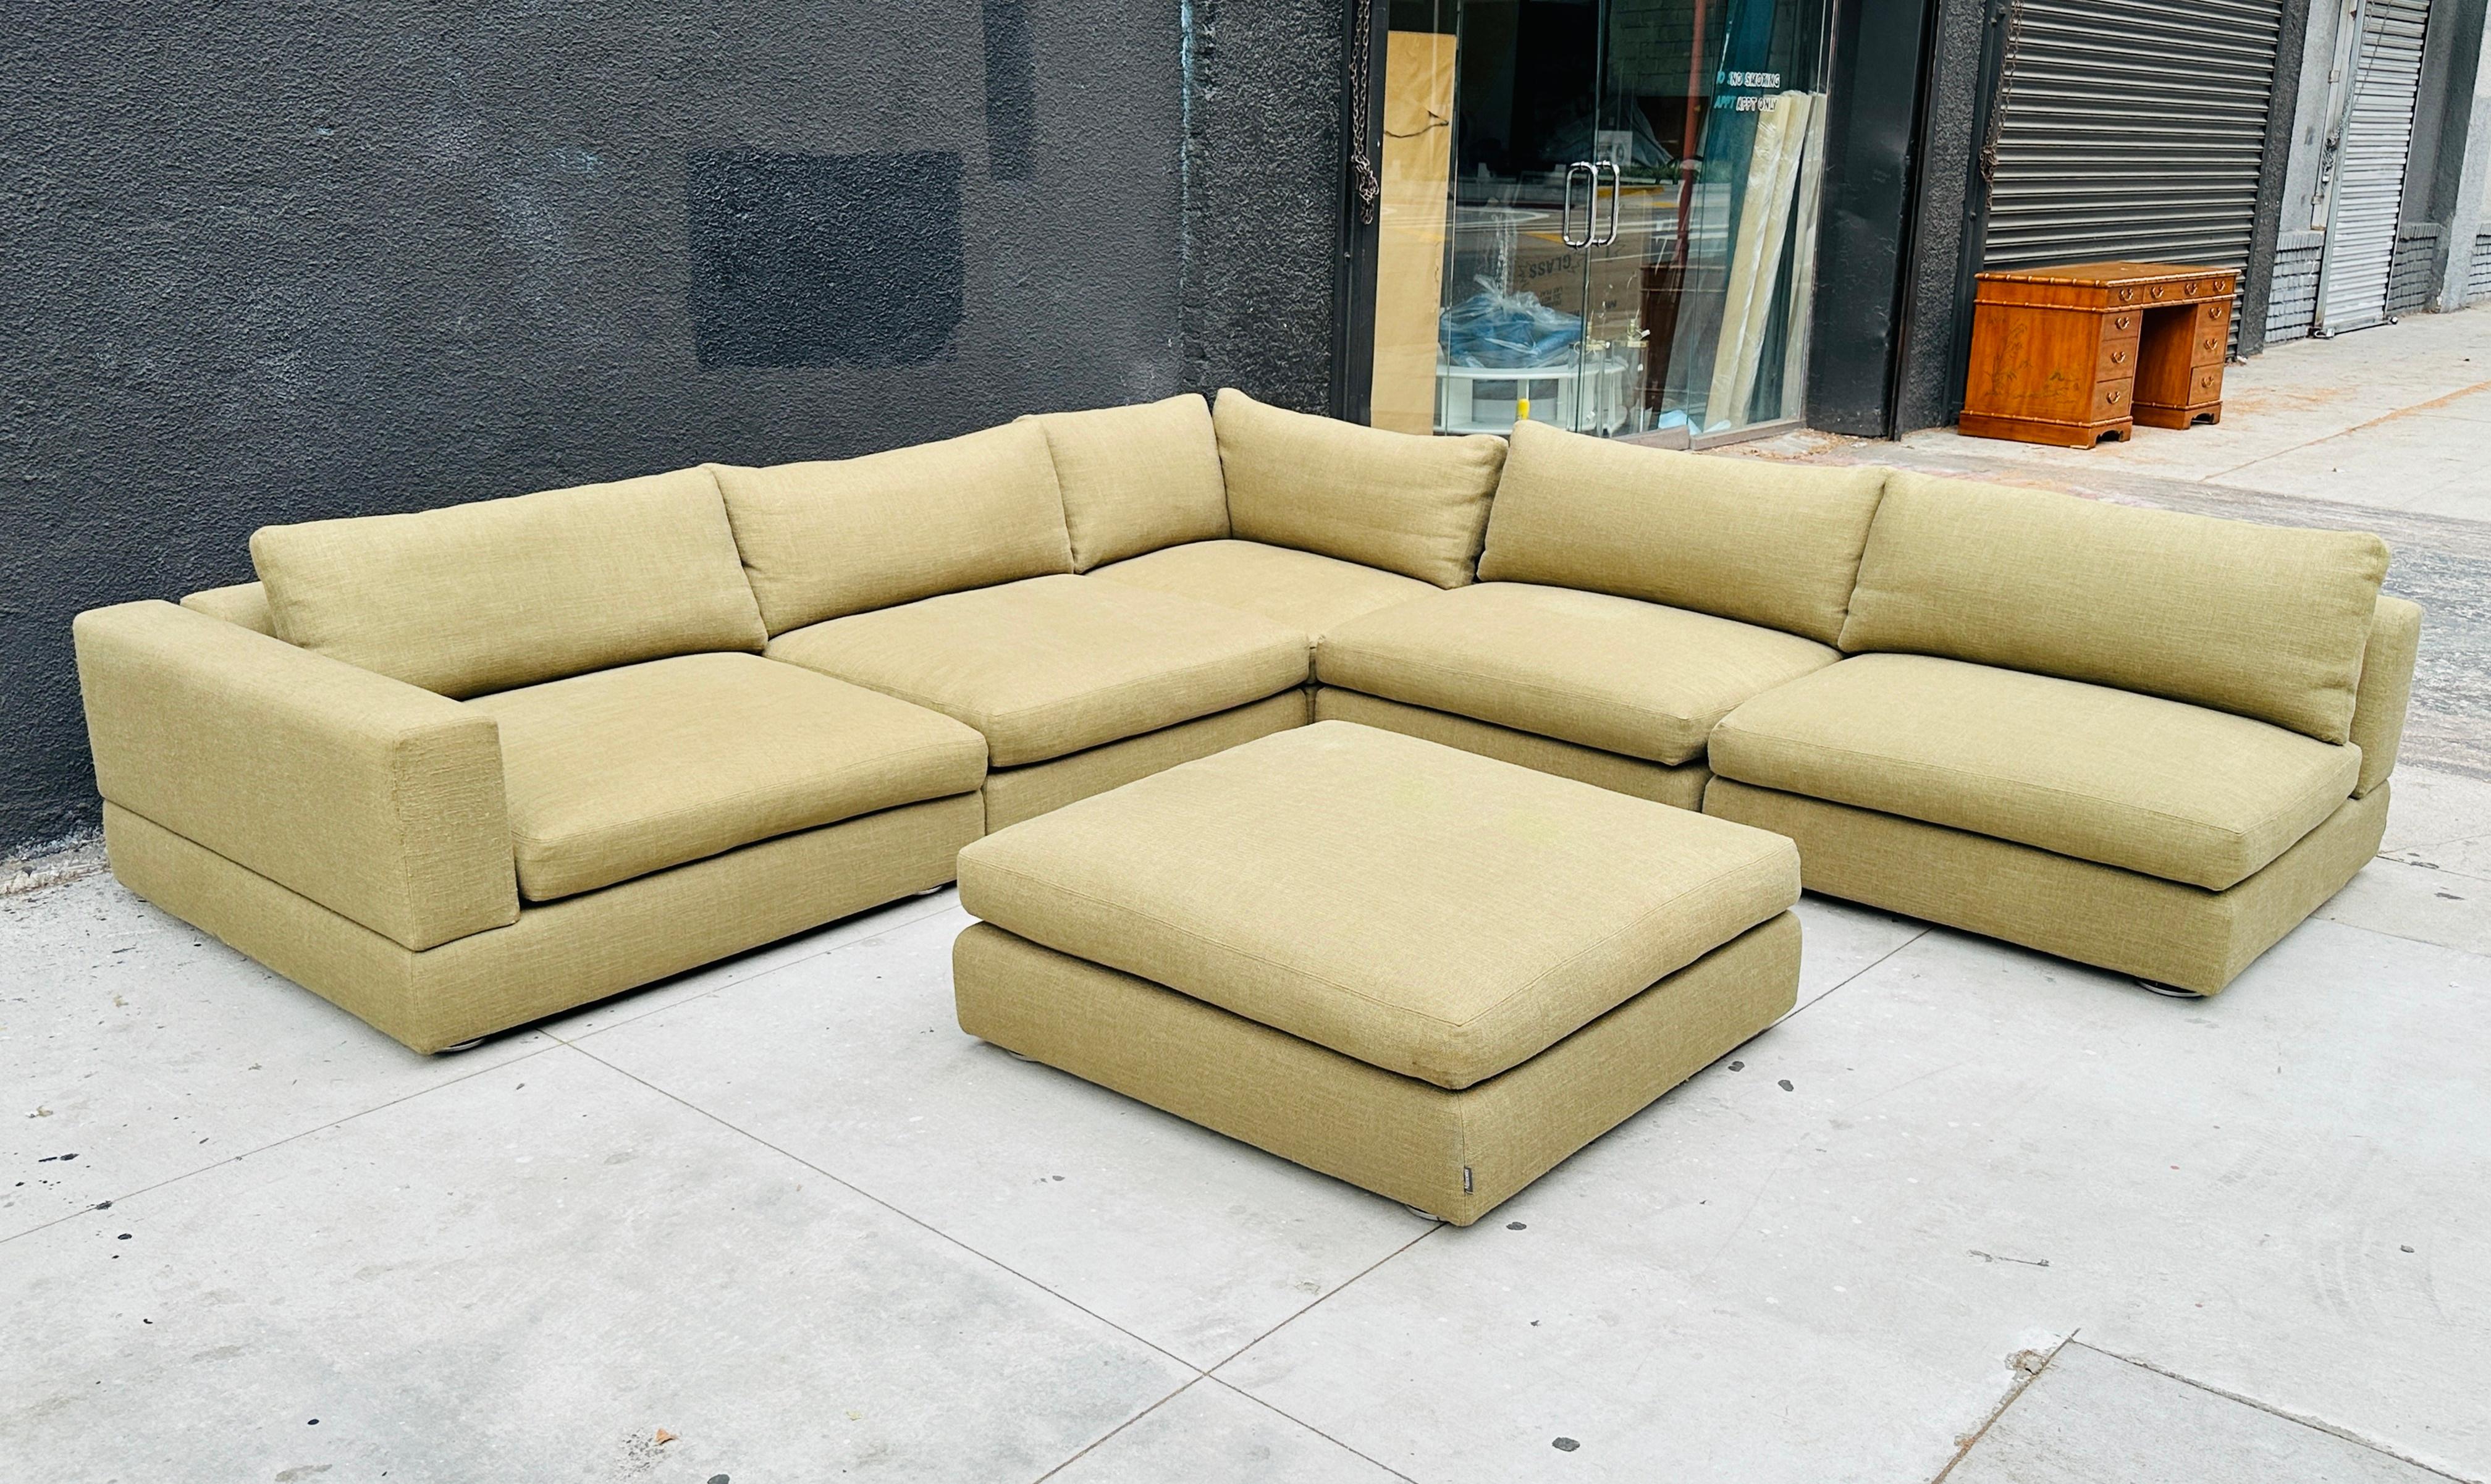 6 Piece Sectional Made in Italy by Rodolfo Dordoni for Minotti, Italy 2006 For Sale 6